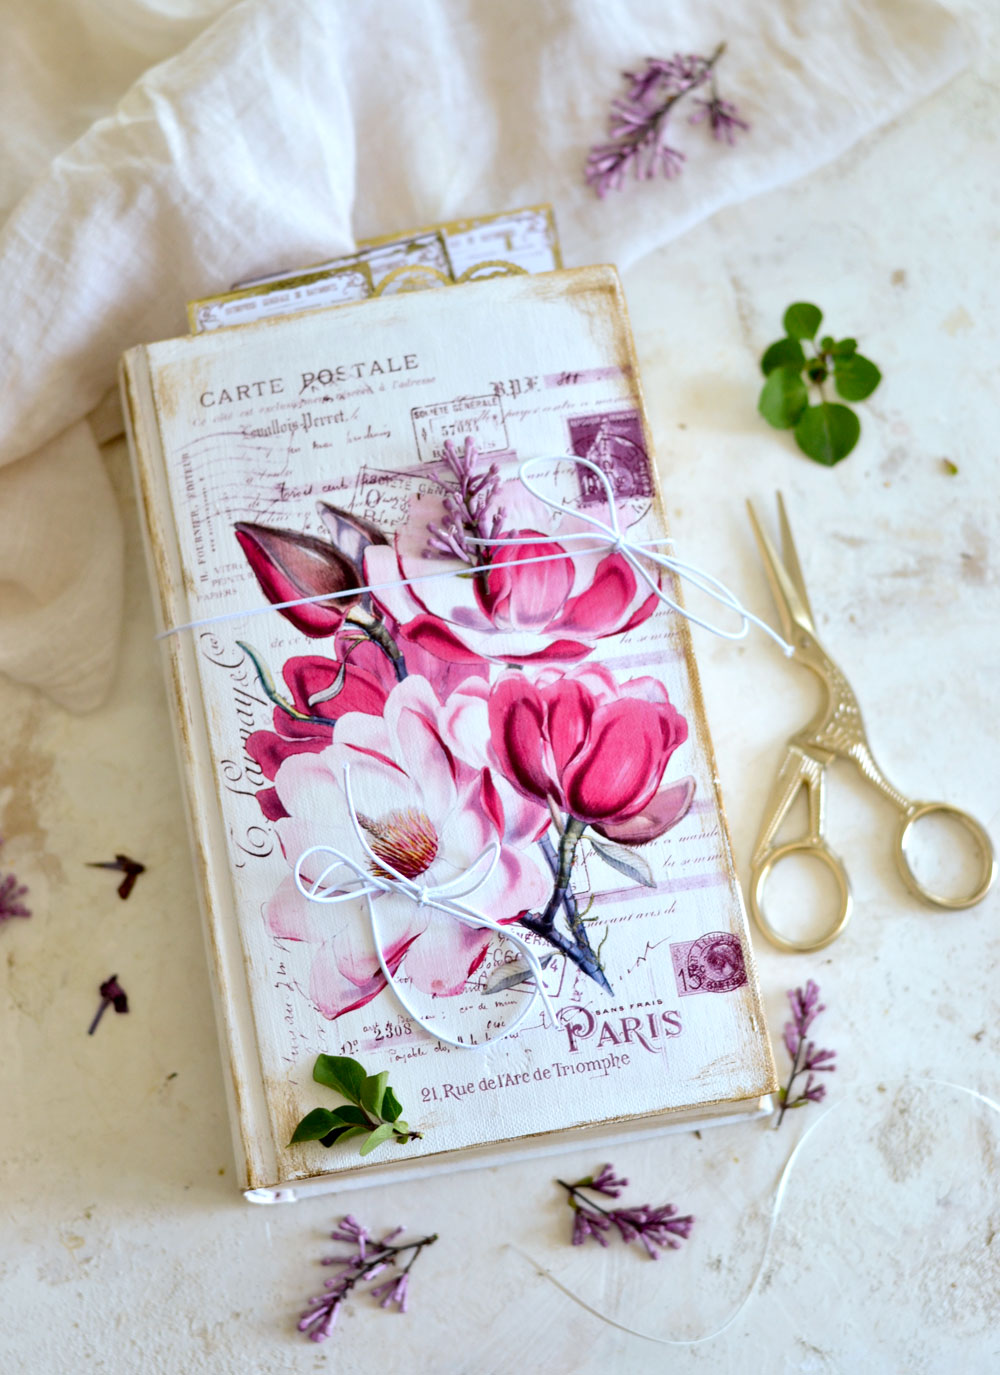 dried flowers on a book cover